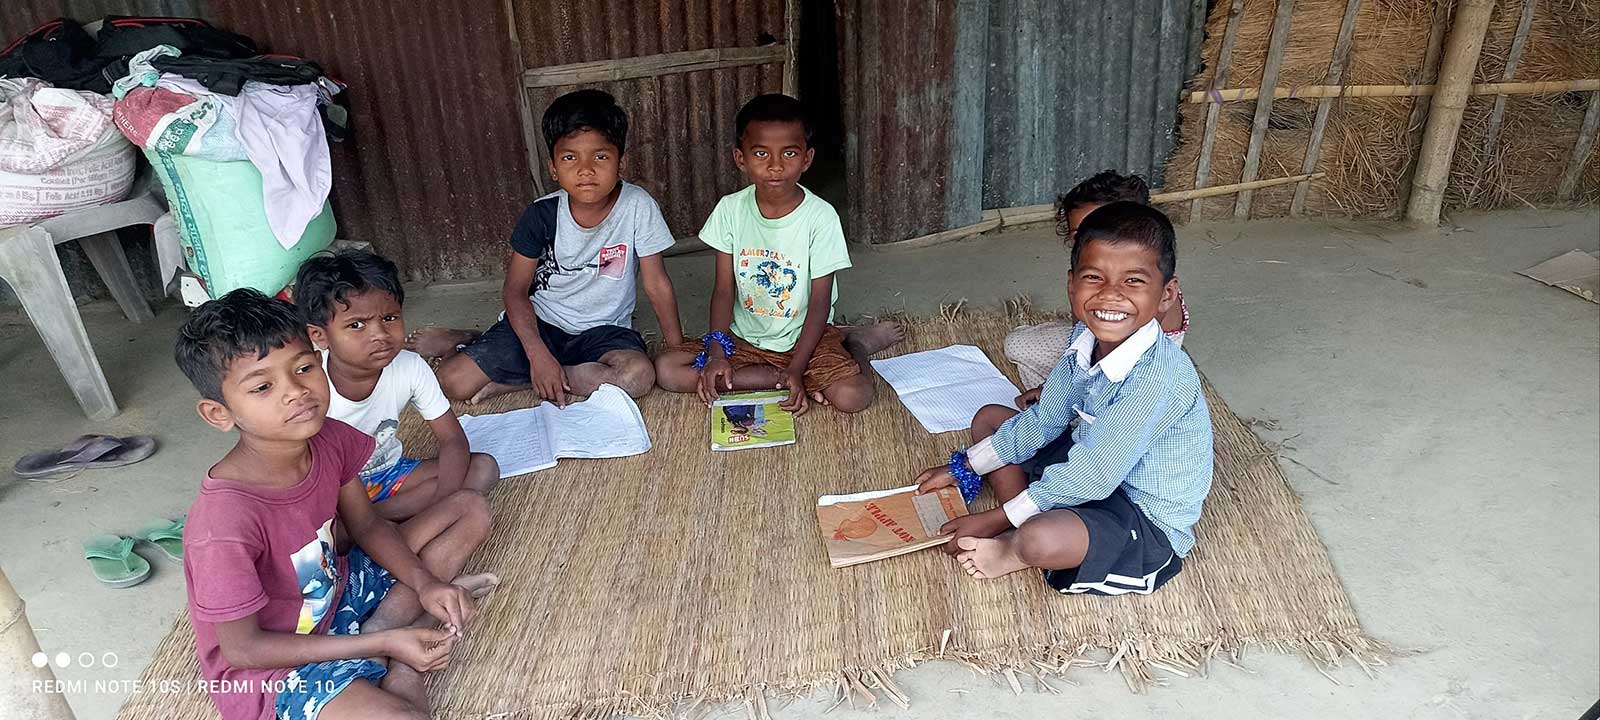 Four children on a straw carpet and doing a study session.